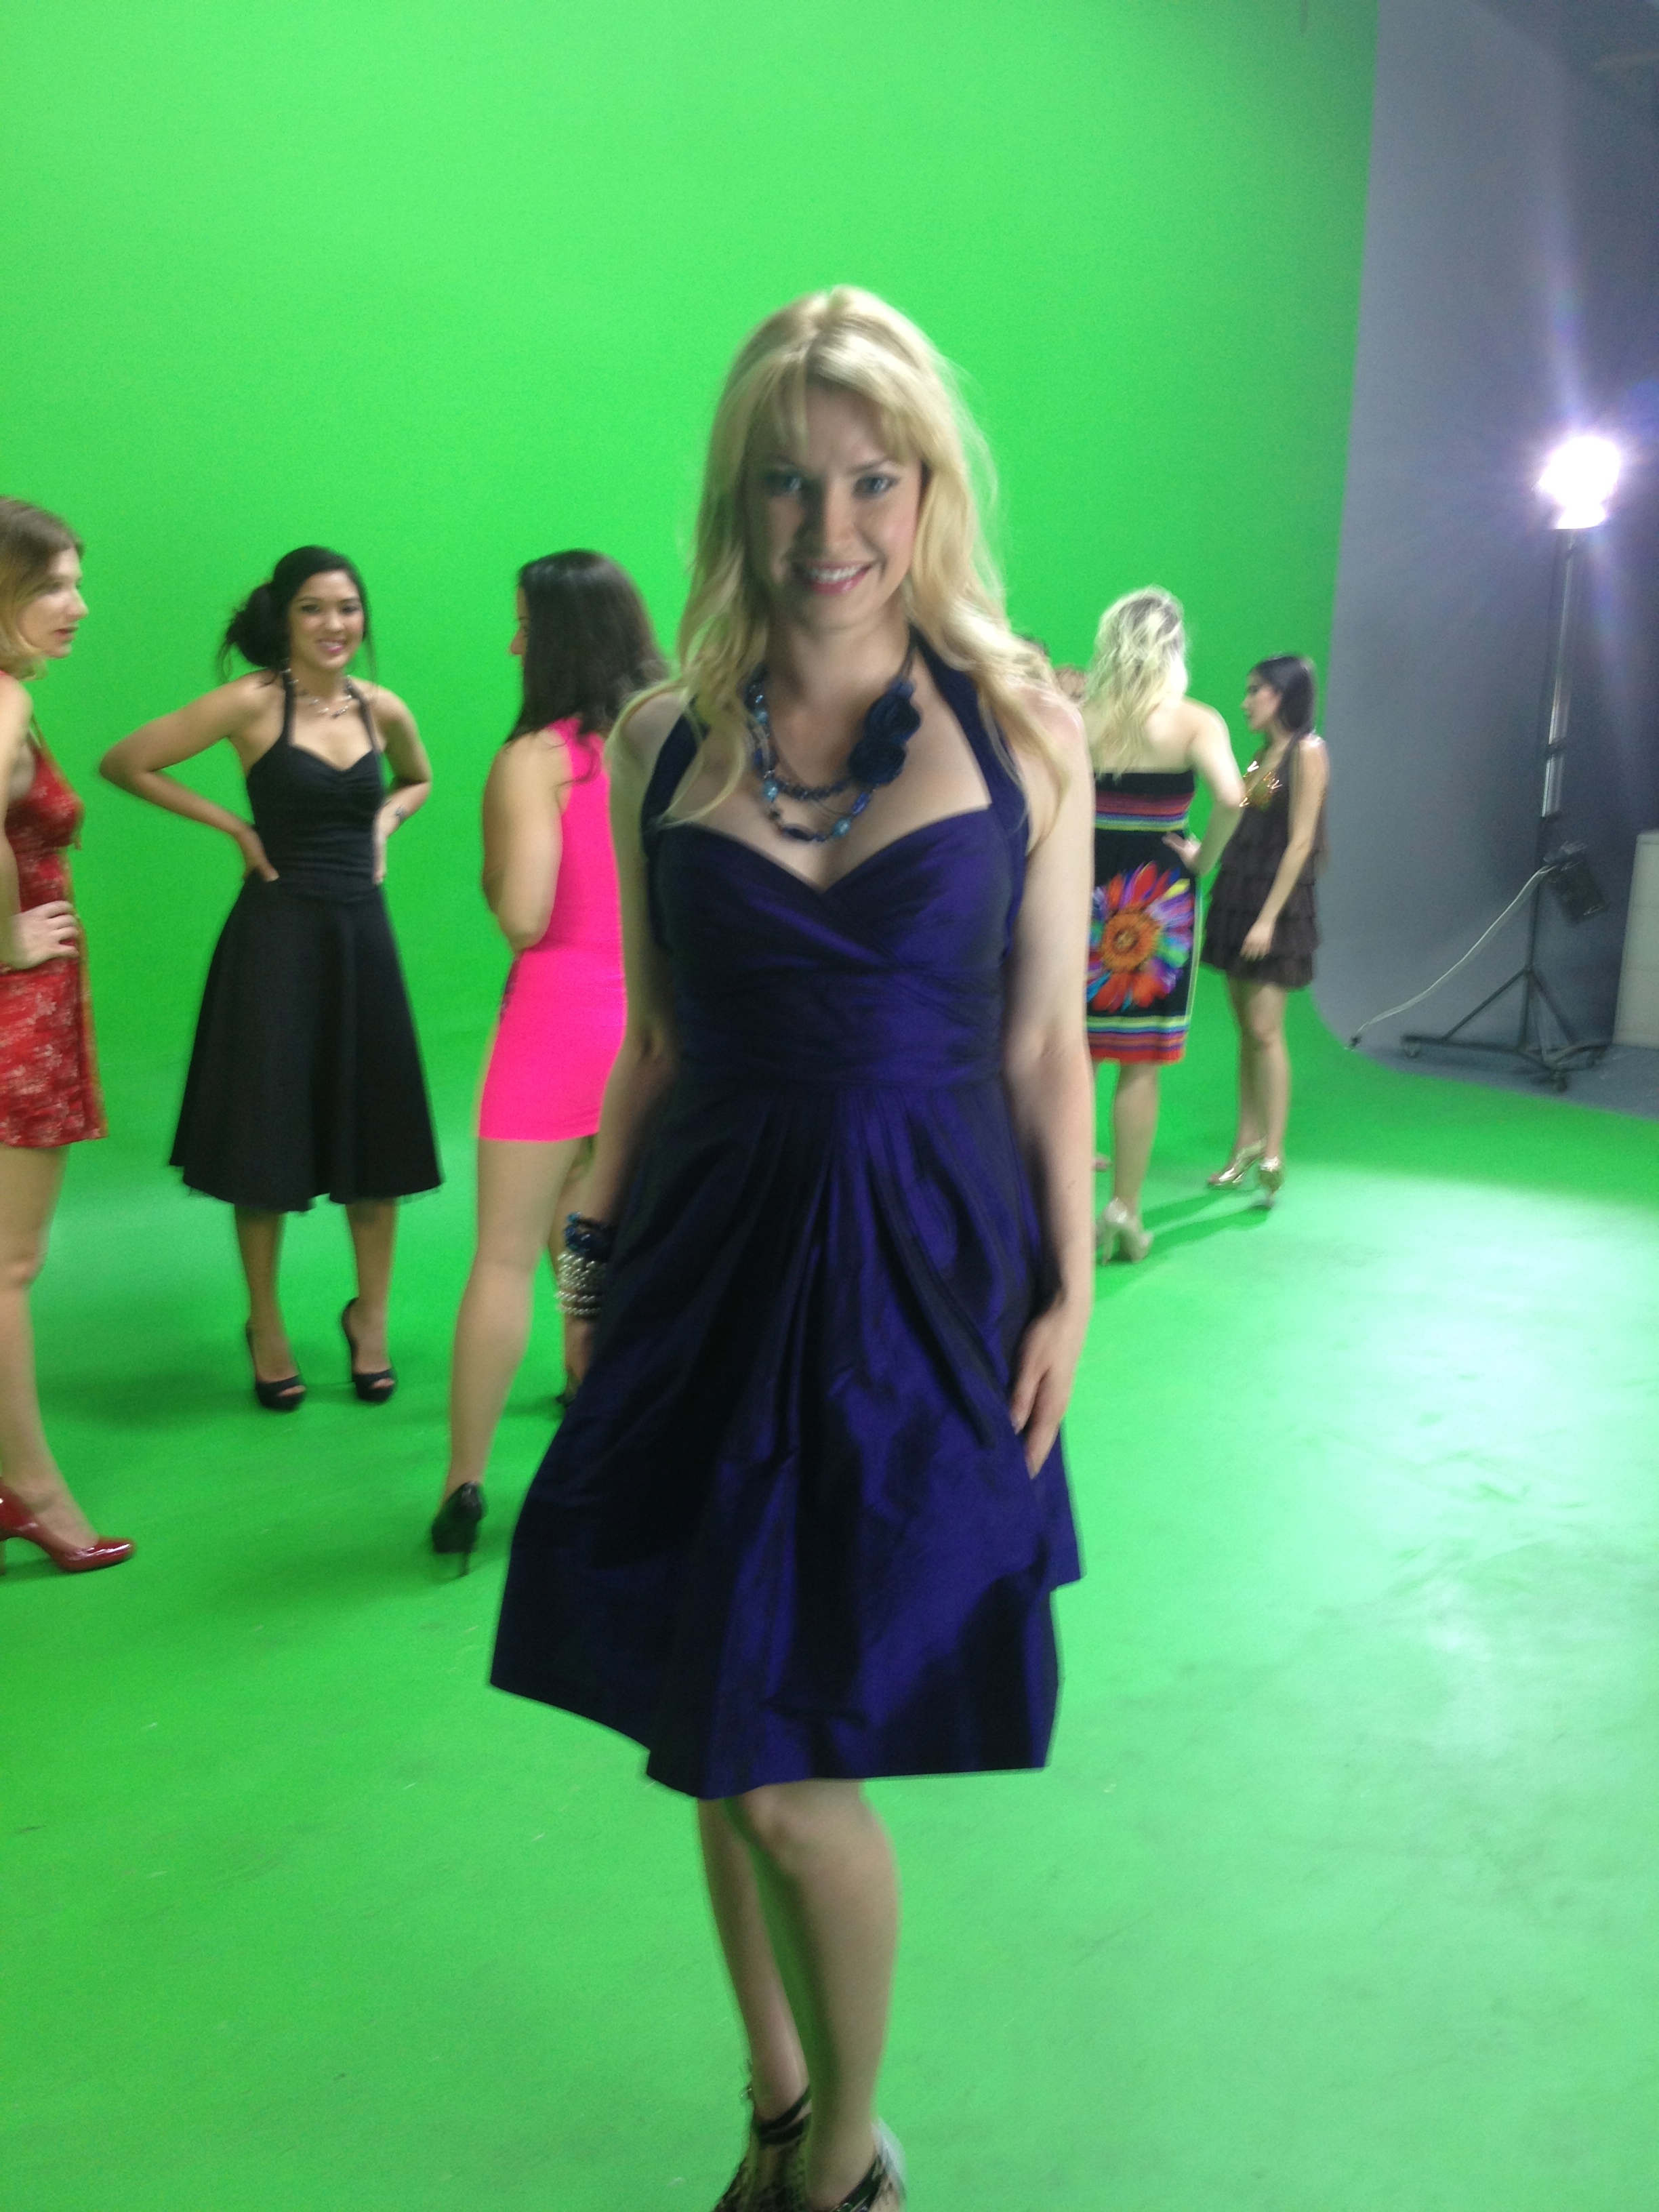 On set of Belleza commercial